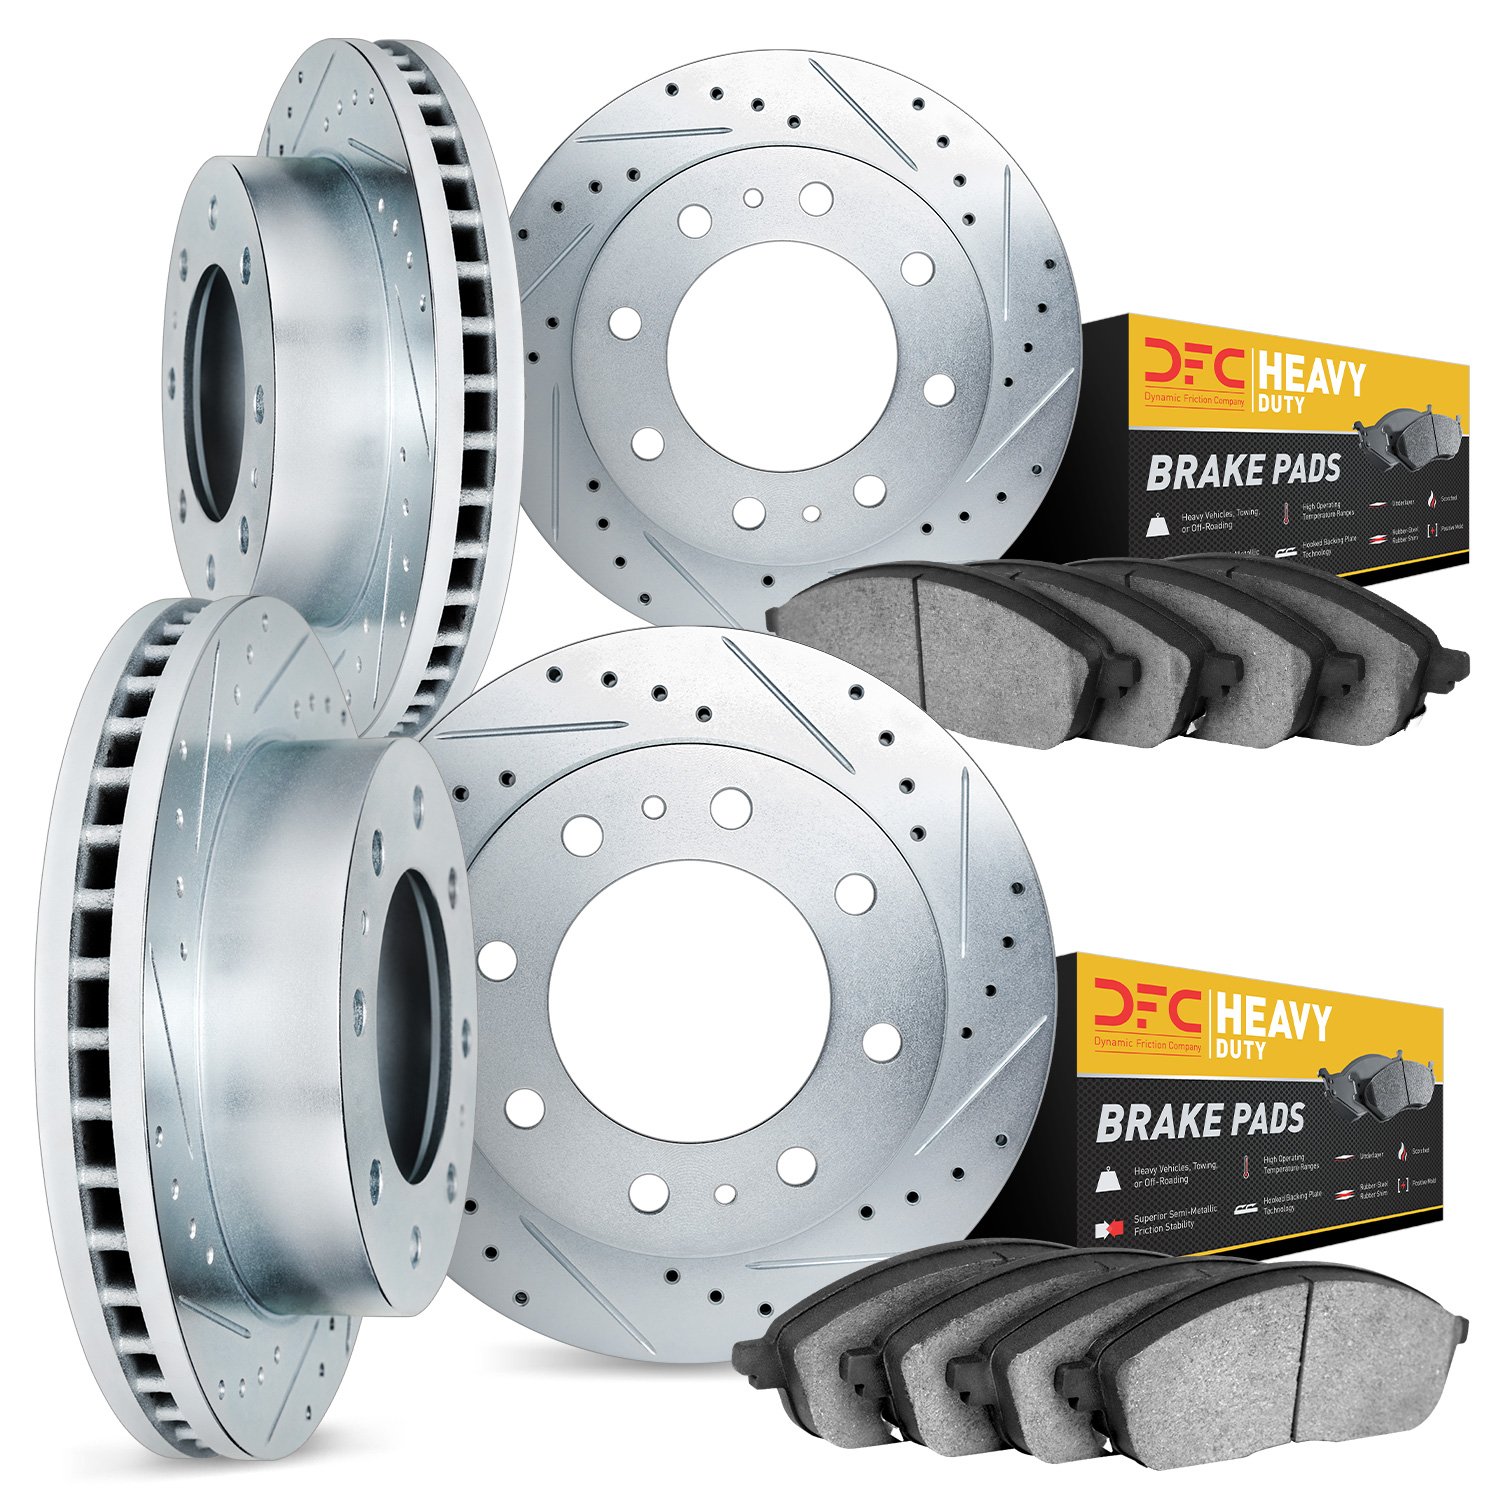 7204-99110 Drilled/Slotted Rotors w/Heavy-Duty Brake Pads Kit [Silver], Fits Select Ford/Lincoln/Mercury/Mazda, Position: Front